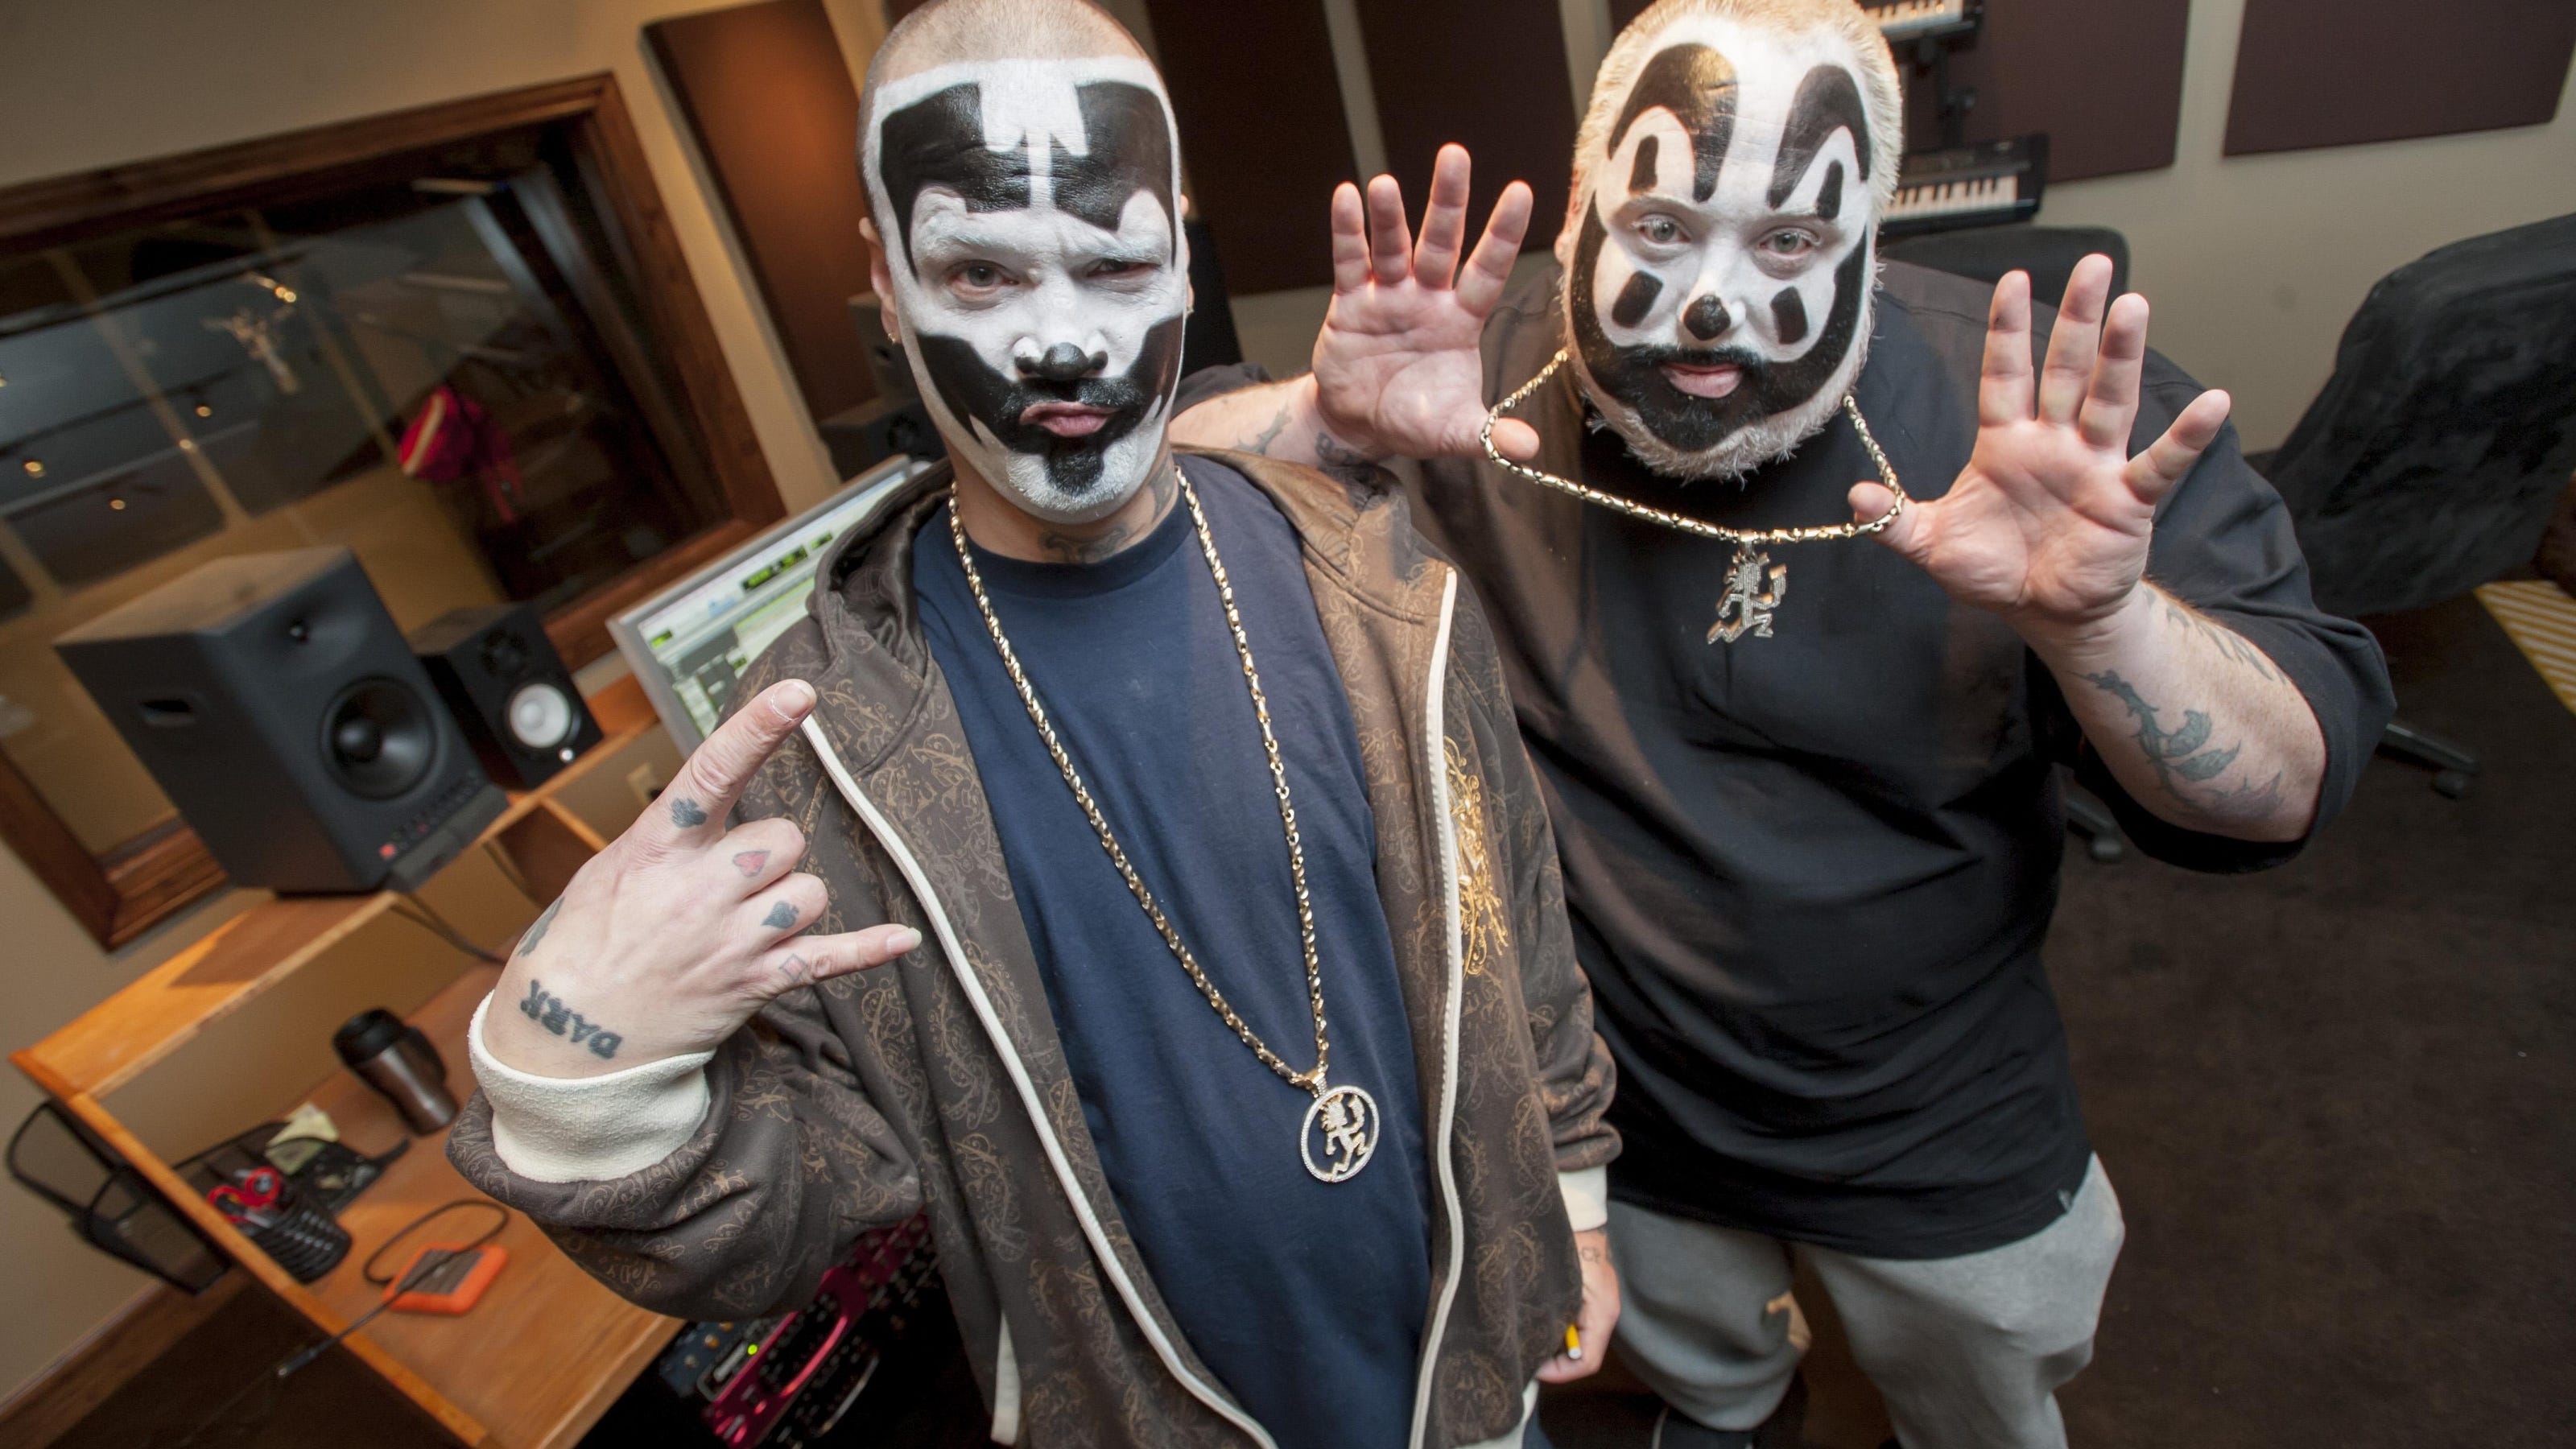 ICP's fight with FBI detailed in new doc 'United States of Insanity'